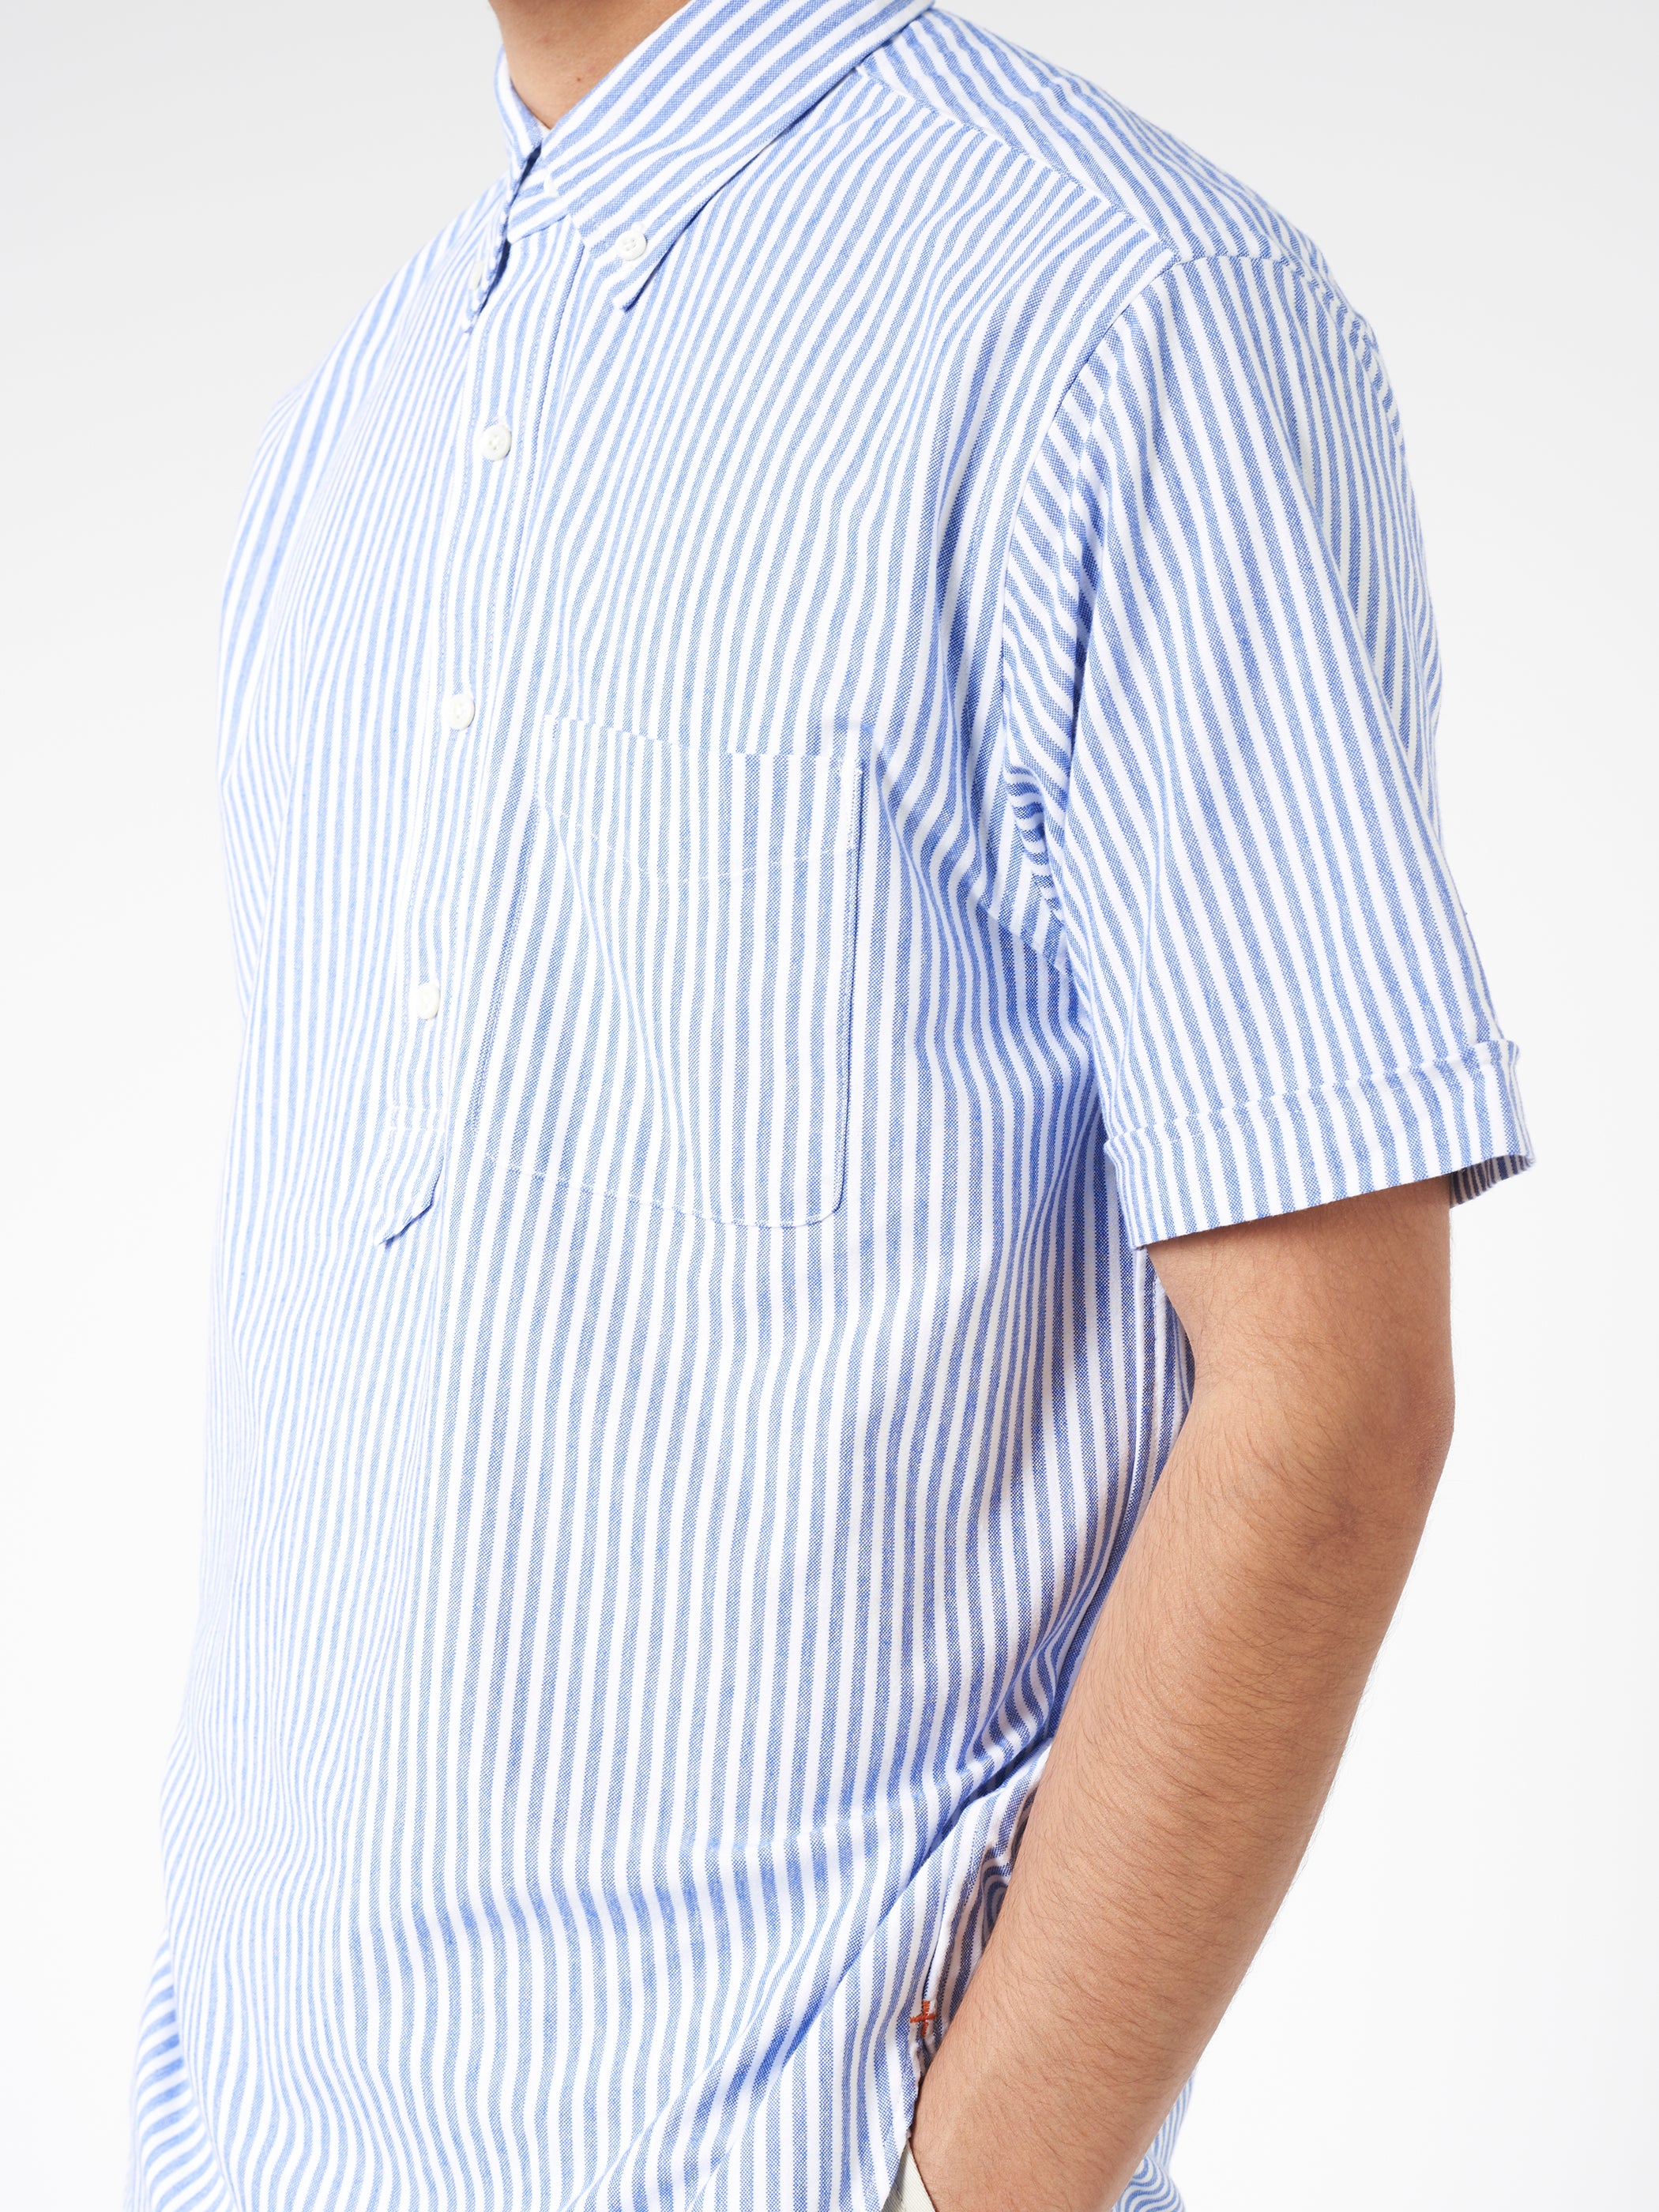 Knit Oxford Stripe Pullover Short Sleeve Button Down Shirt